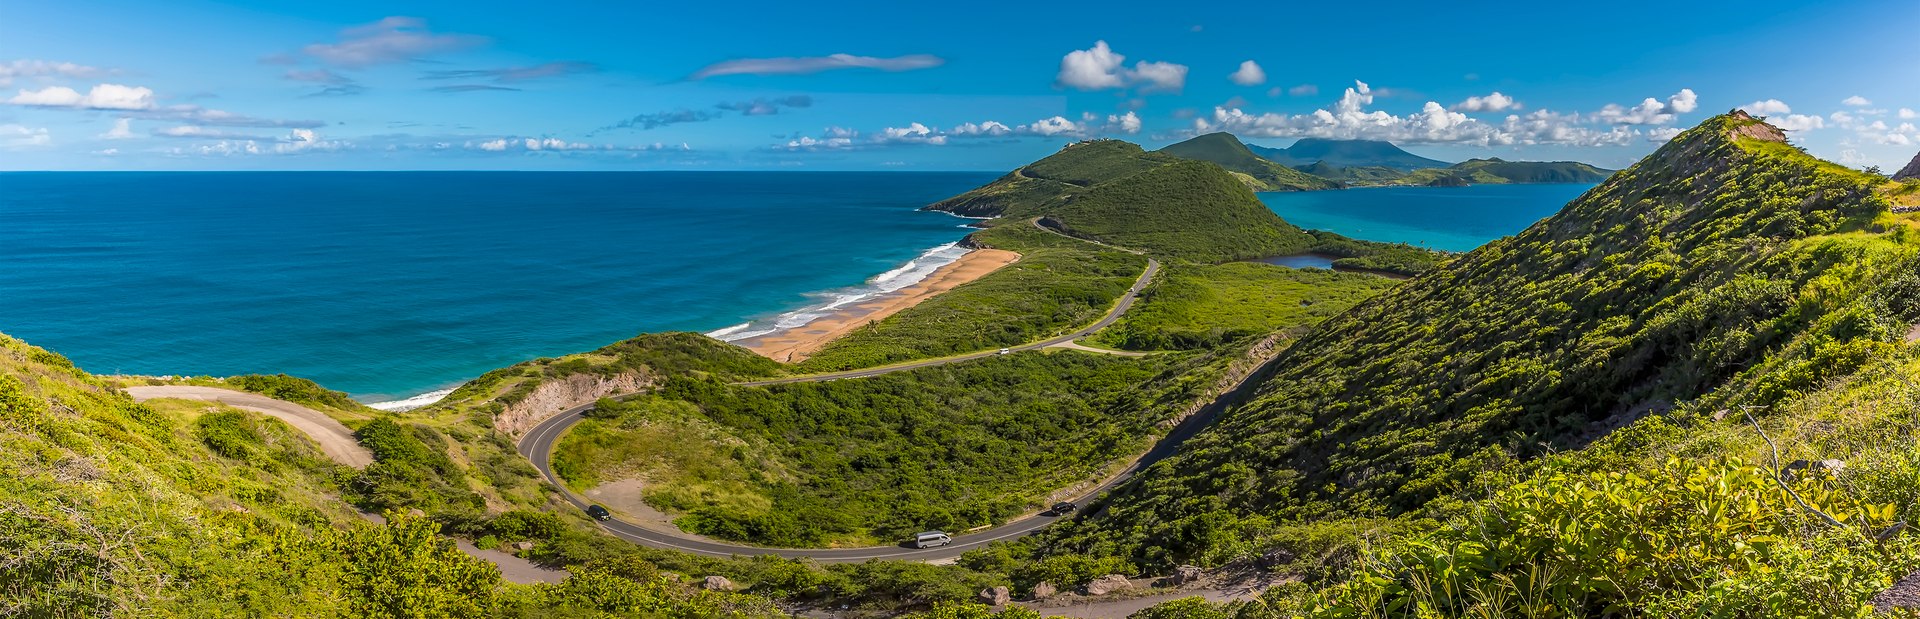 St Kitts and Nevis charter itineraries